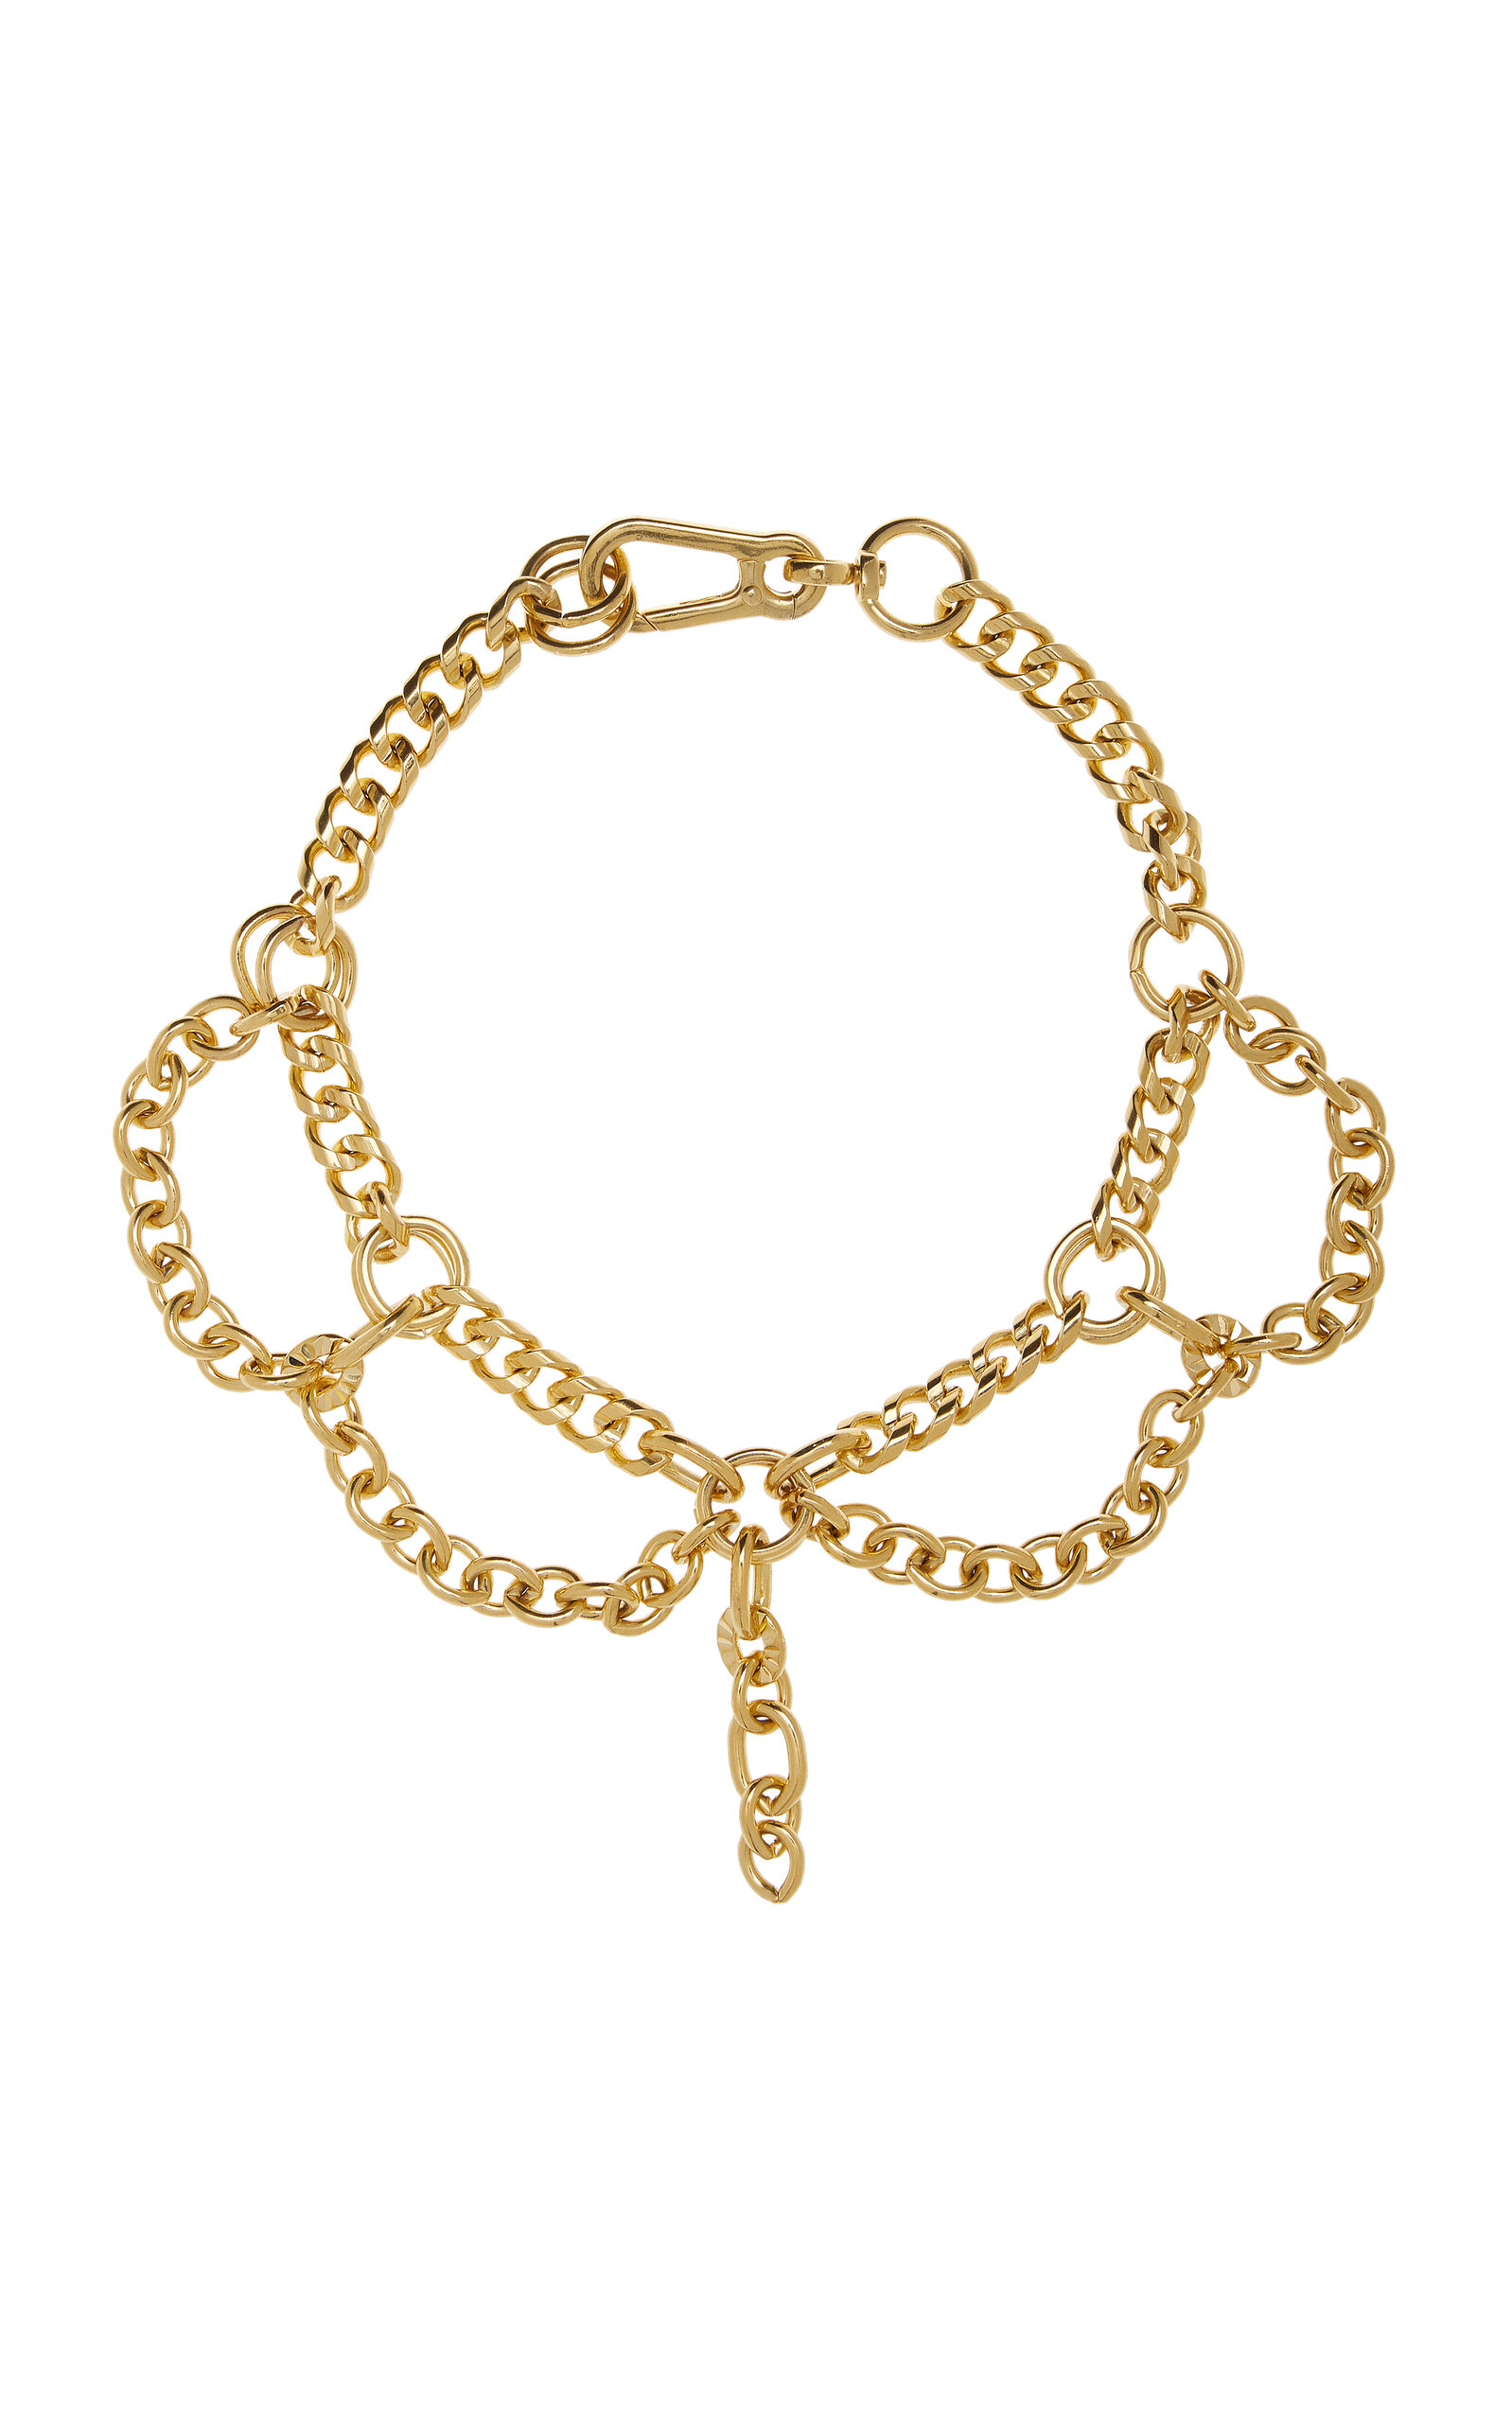 Martine Ali Women's Exclusive Coliseo 14k Gold Dipped Necklace